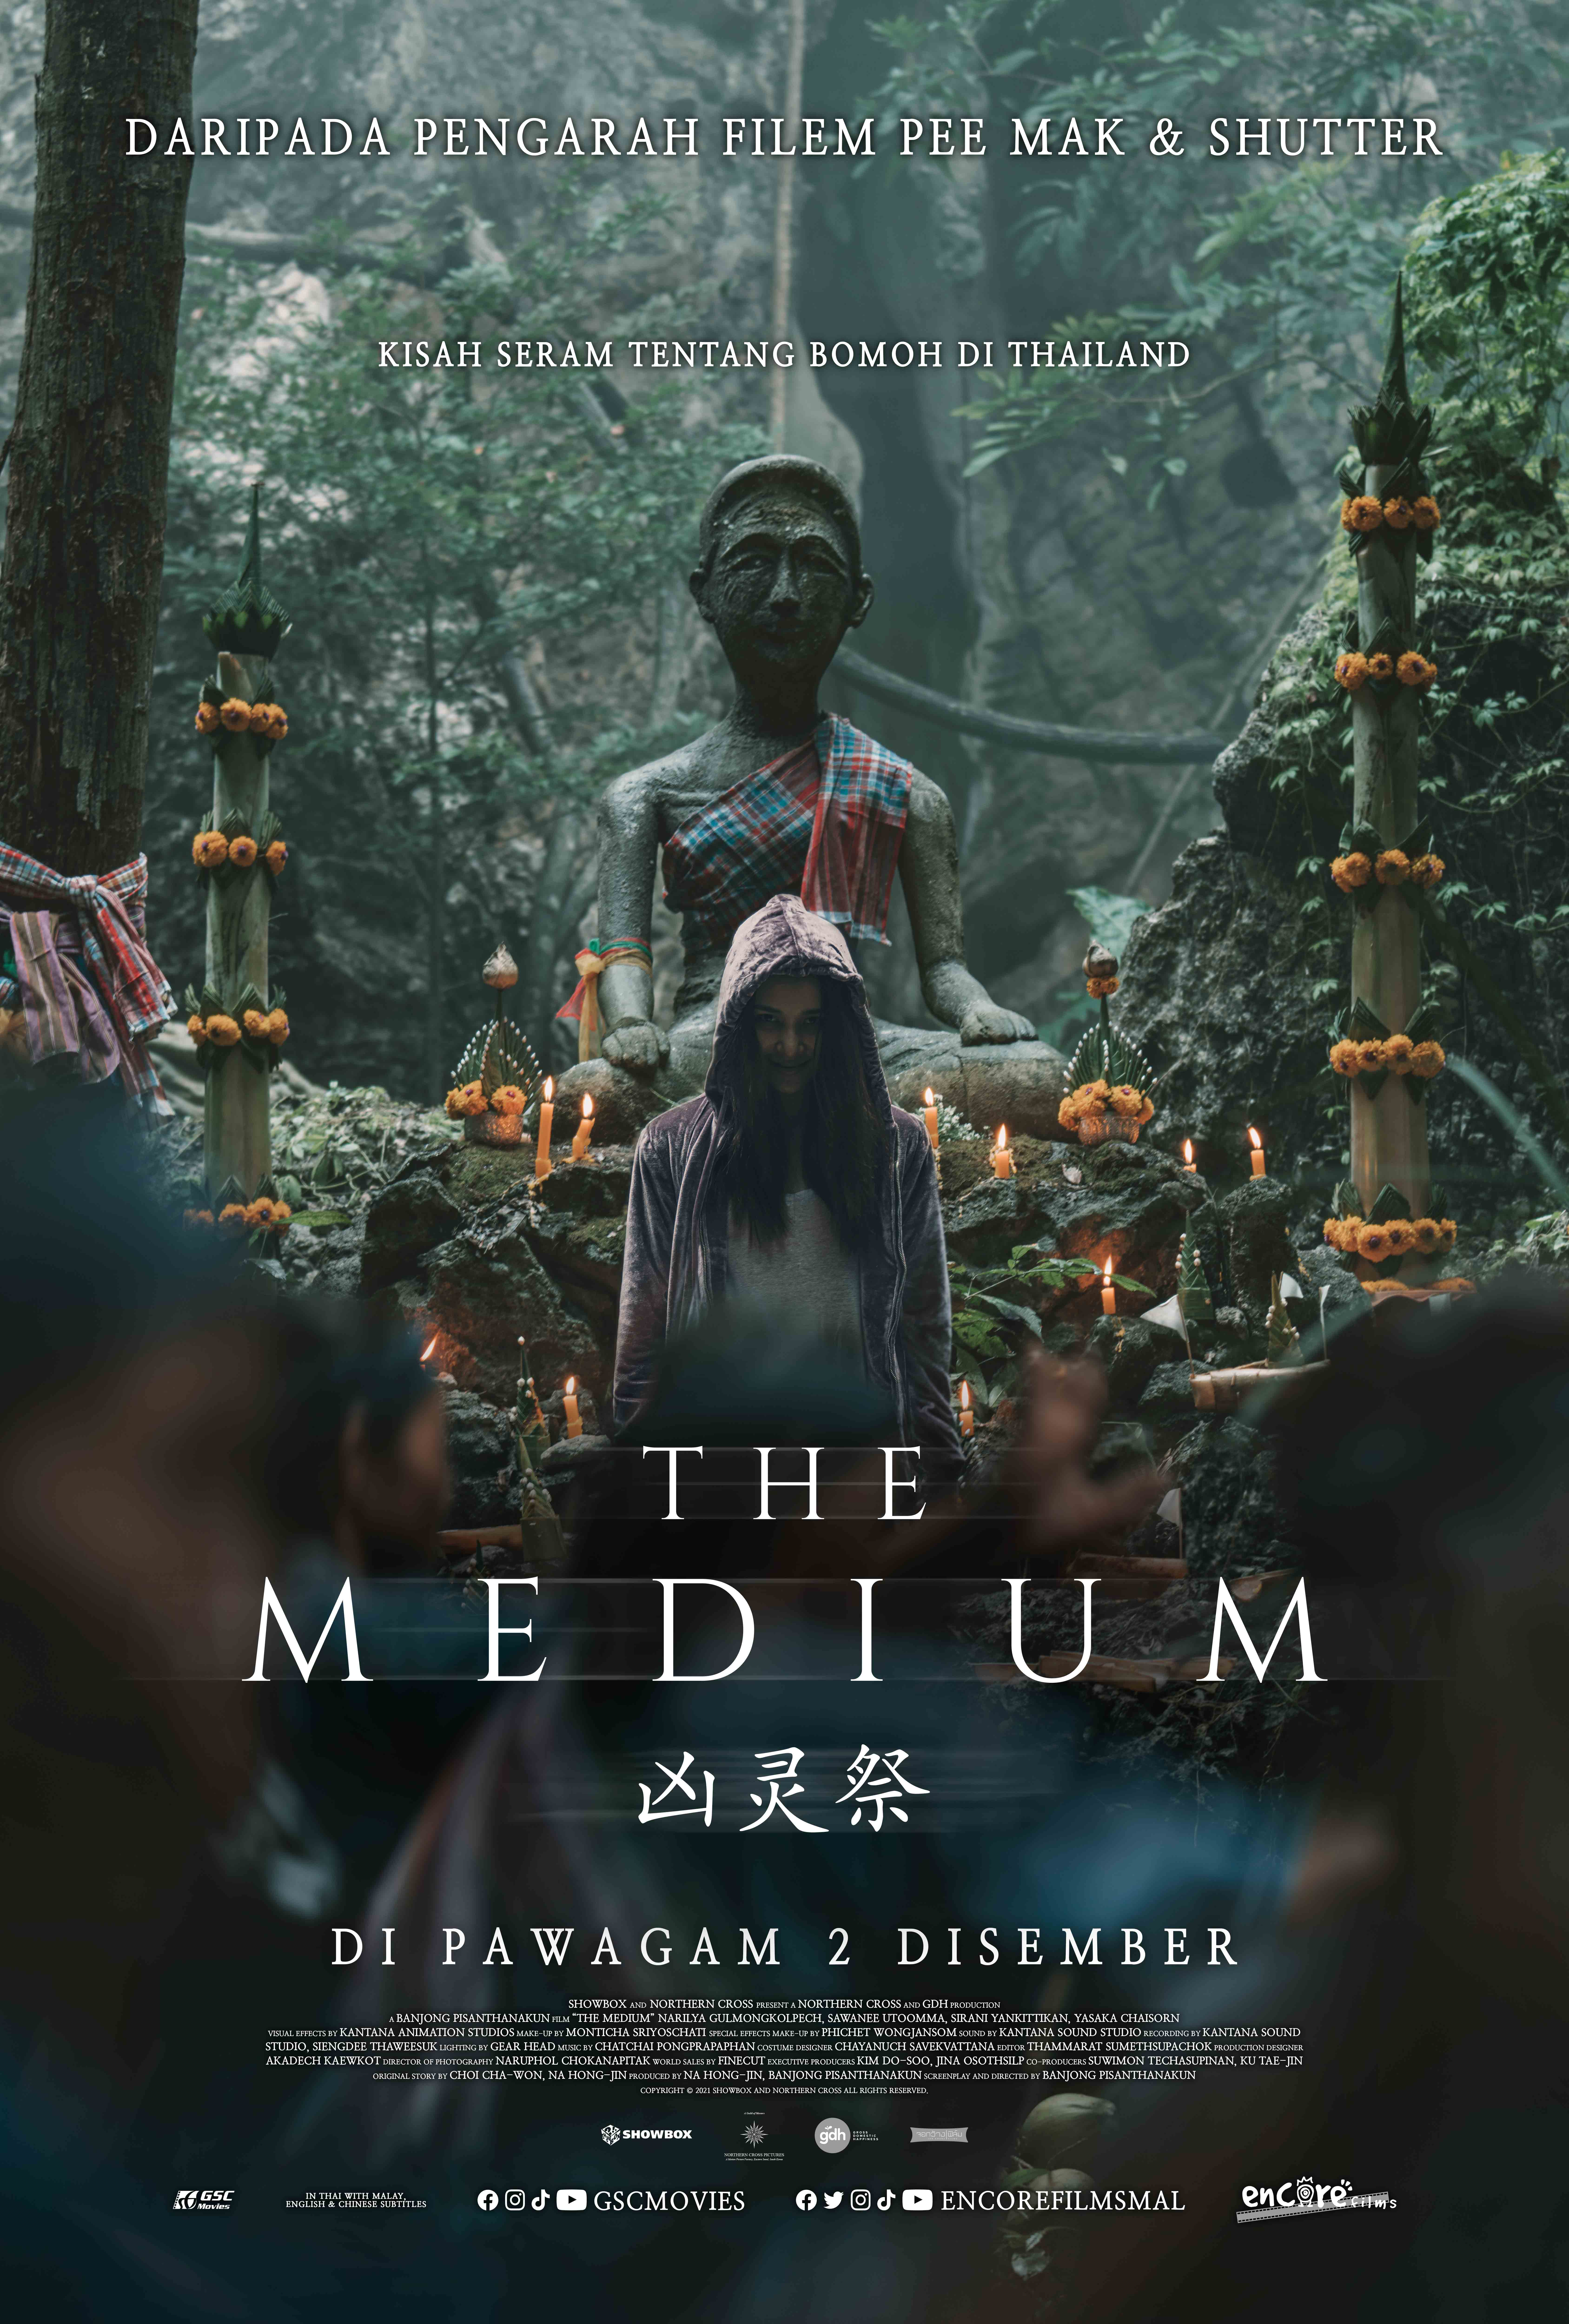 Here's your first look at upcoming Thai horror 'The Medium